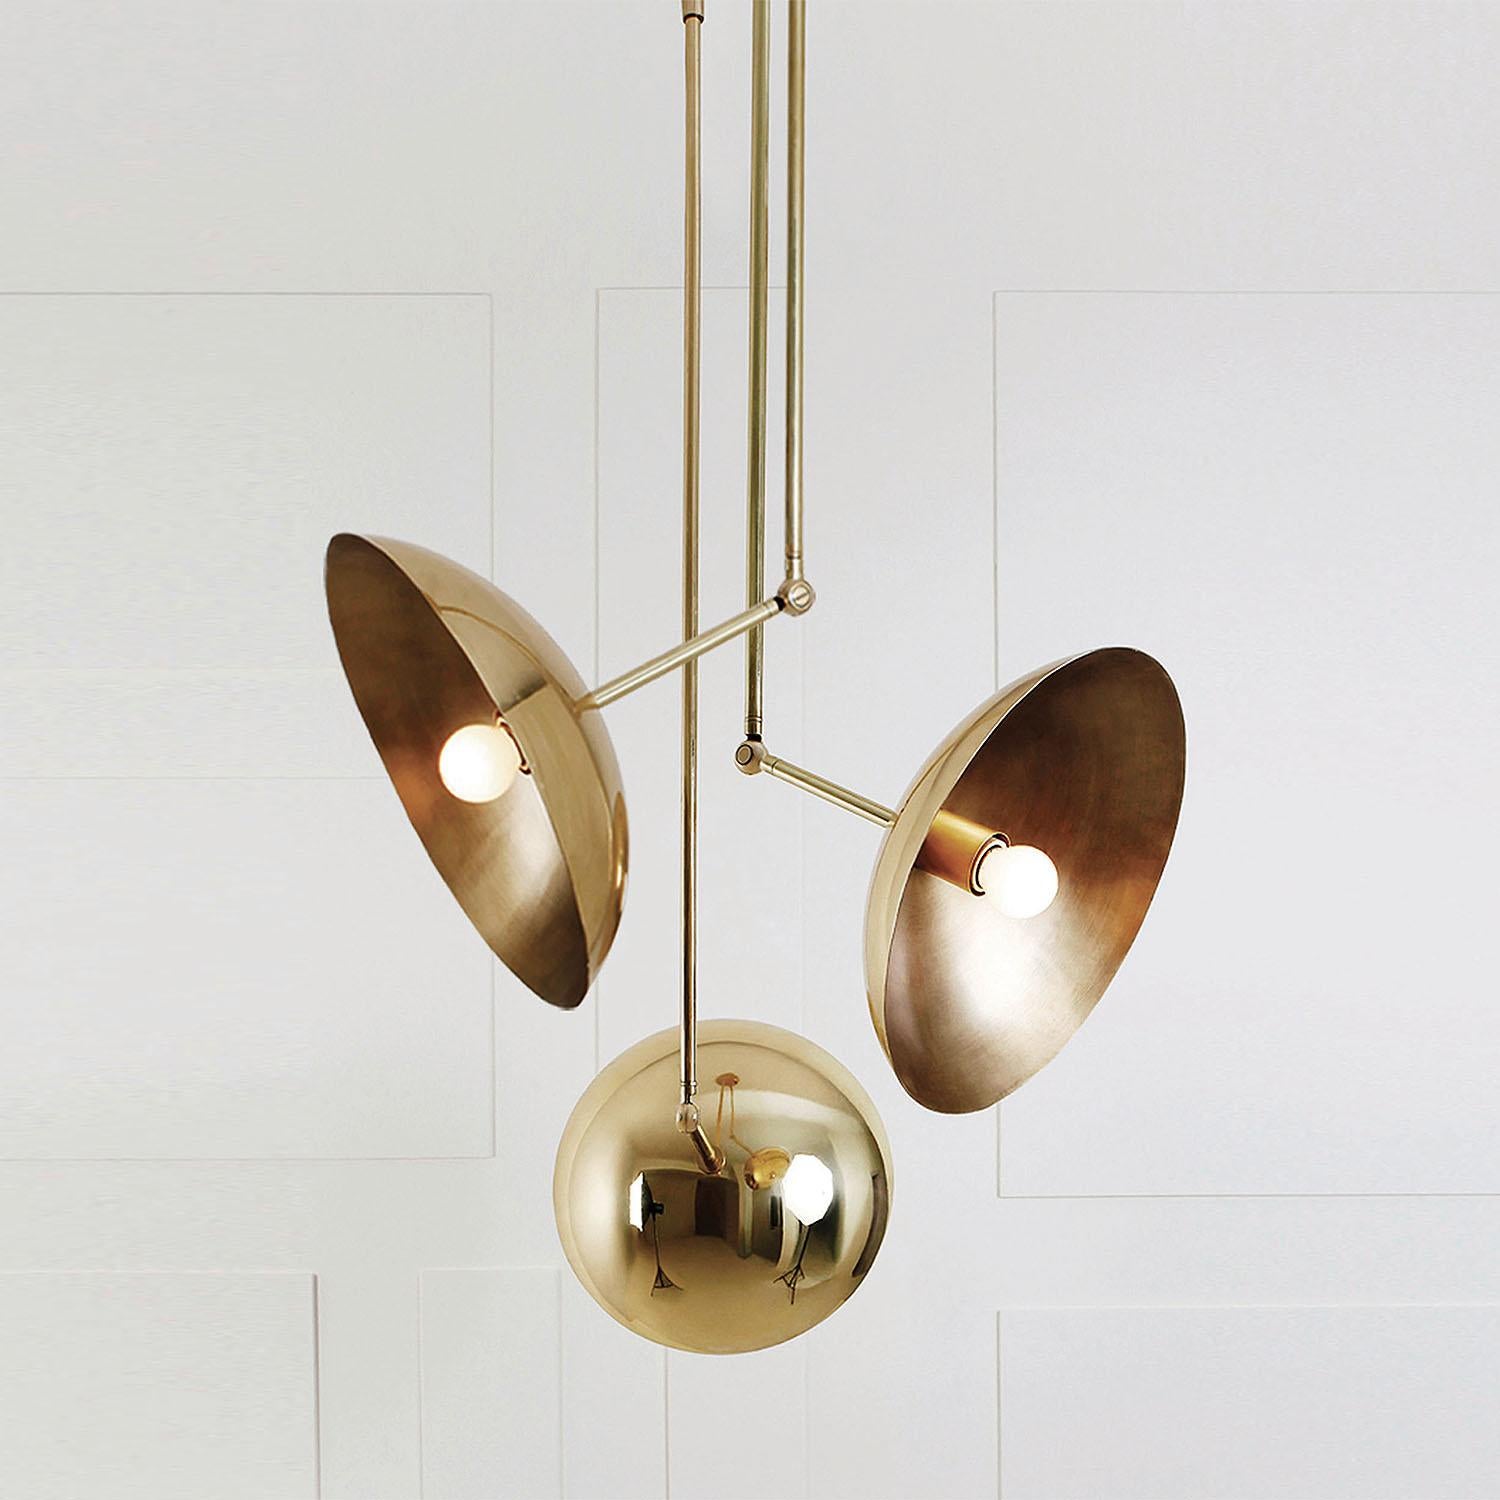 Contemporary Sculpted Brass Pendant, Tango Three Dome by Paul Matter

Tango is born from playful experimentation with vintage lighting components.
Burnt, aged brass and etched glass are combined to create lighting fixtures that fuse sculptural form